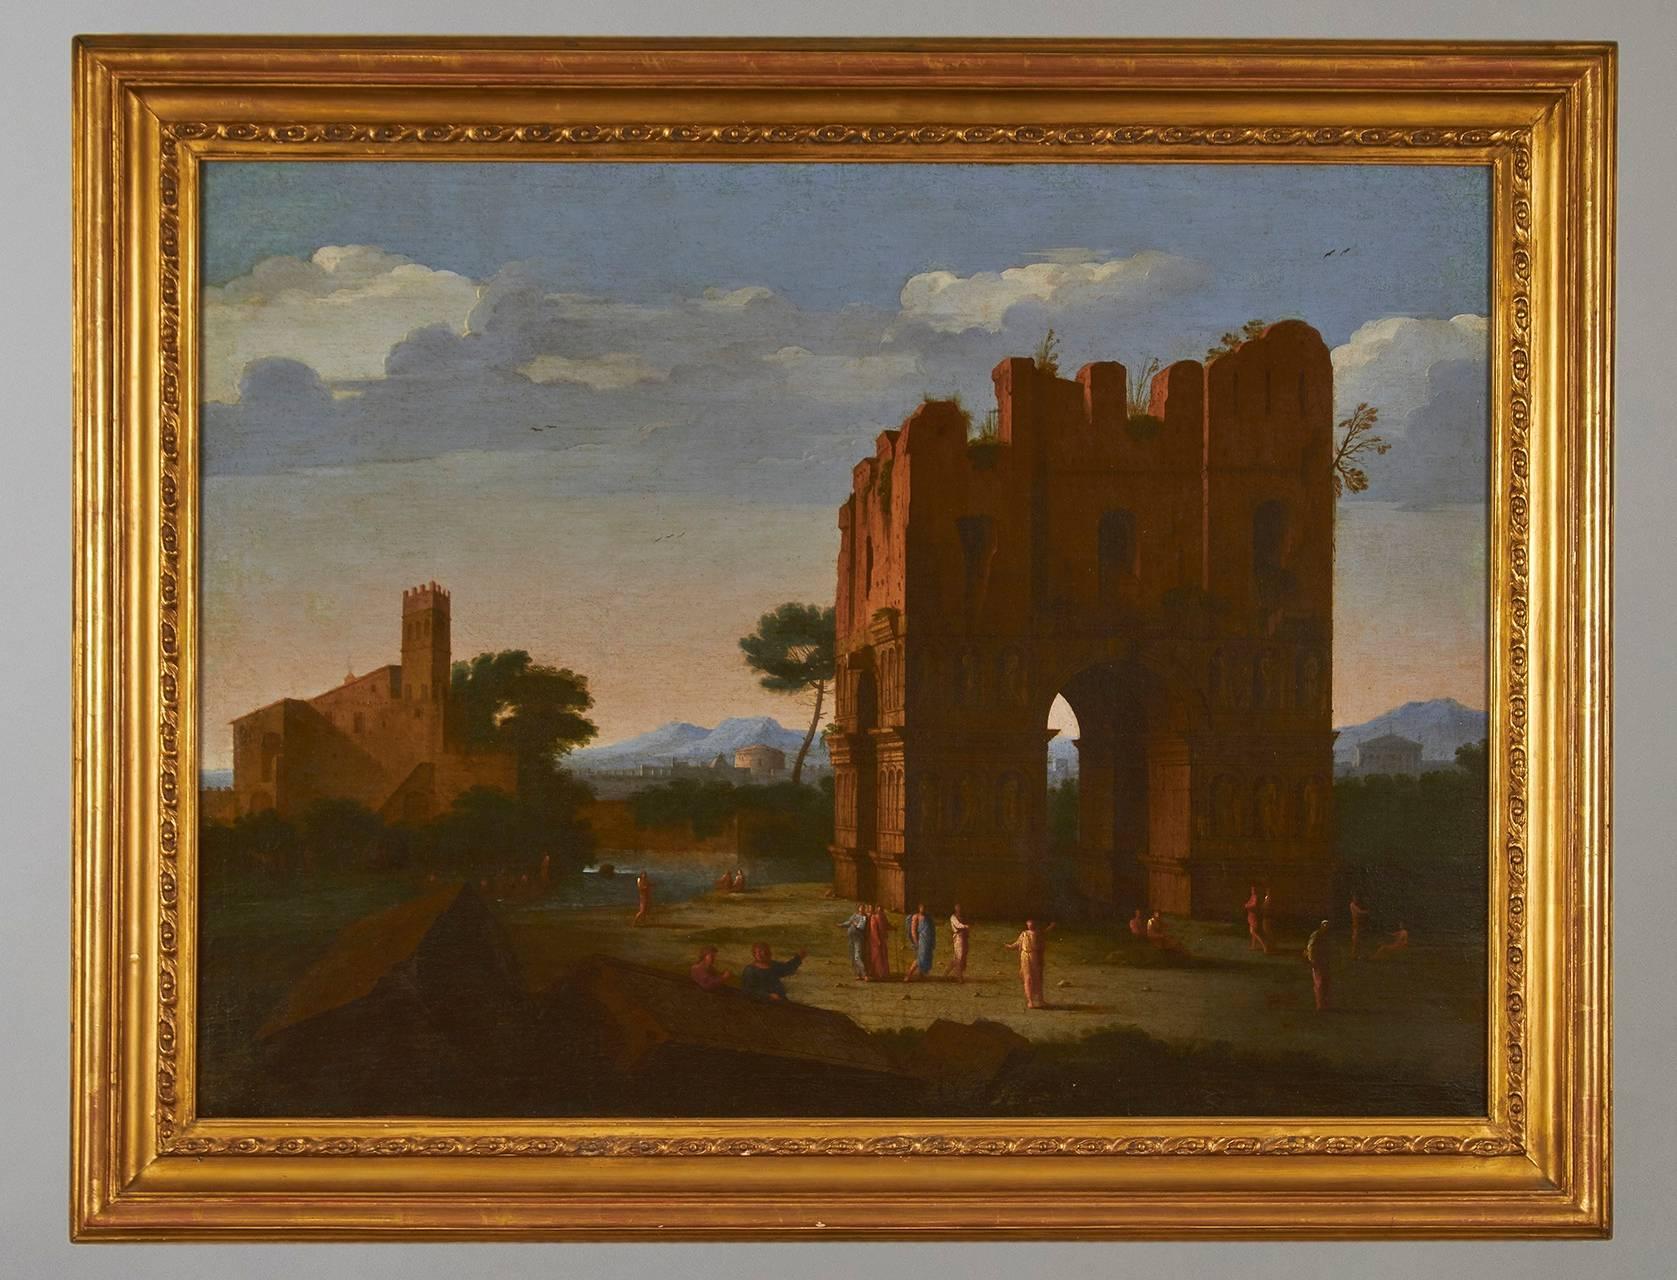 A fine pair of 18th century or earlier Continental classical landscapes in the manner of Giovanni Paolo Pannnini (b. Piacenza 1691, d. Rome 1765). Elaborate unconfirmed provenance on verso of paintings with attribution to Claude Lorrain. Old